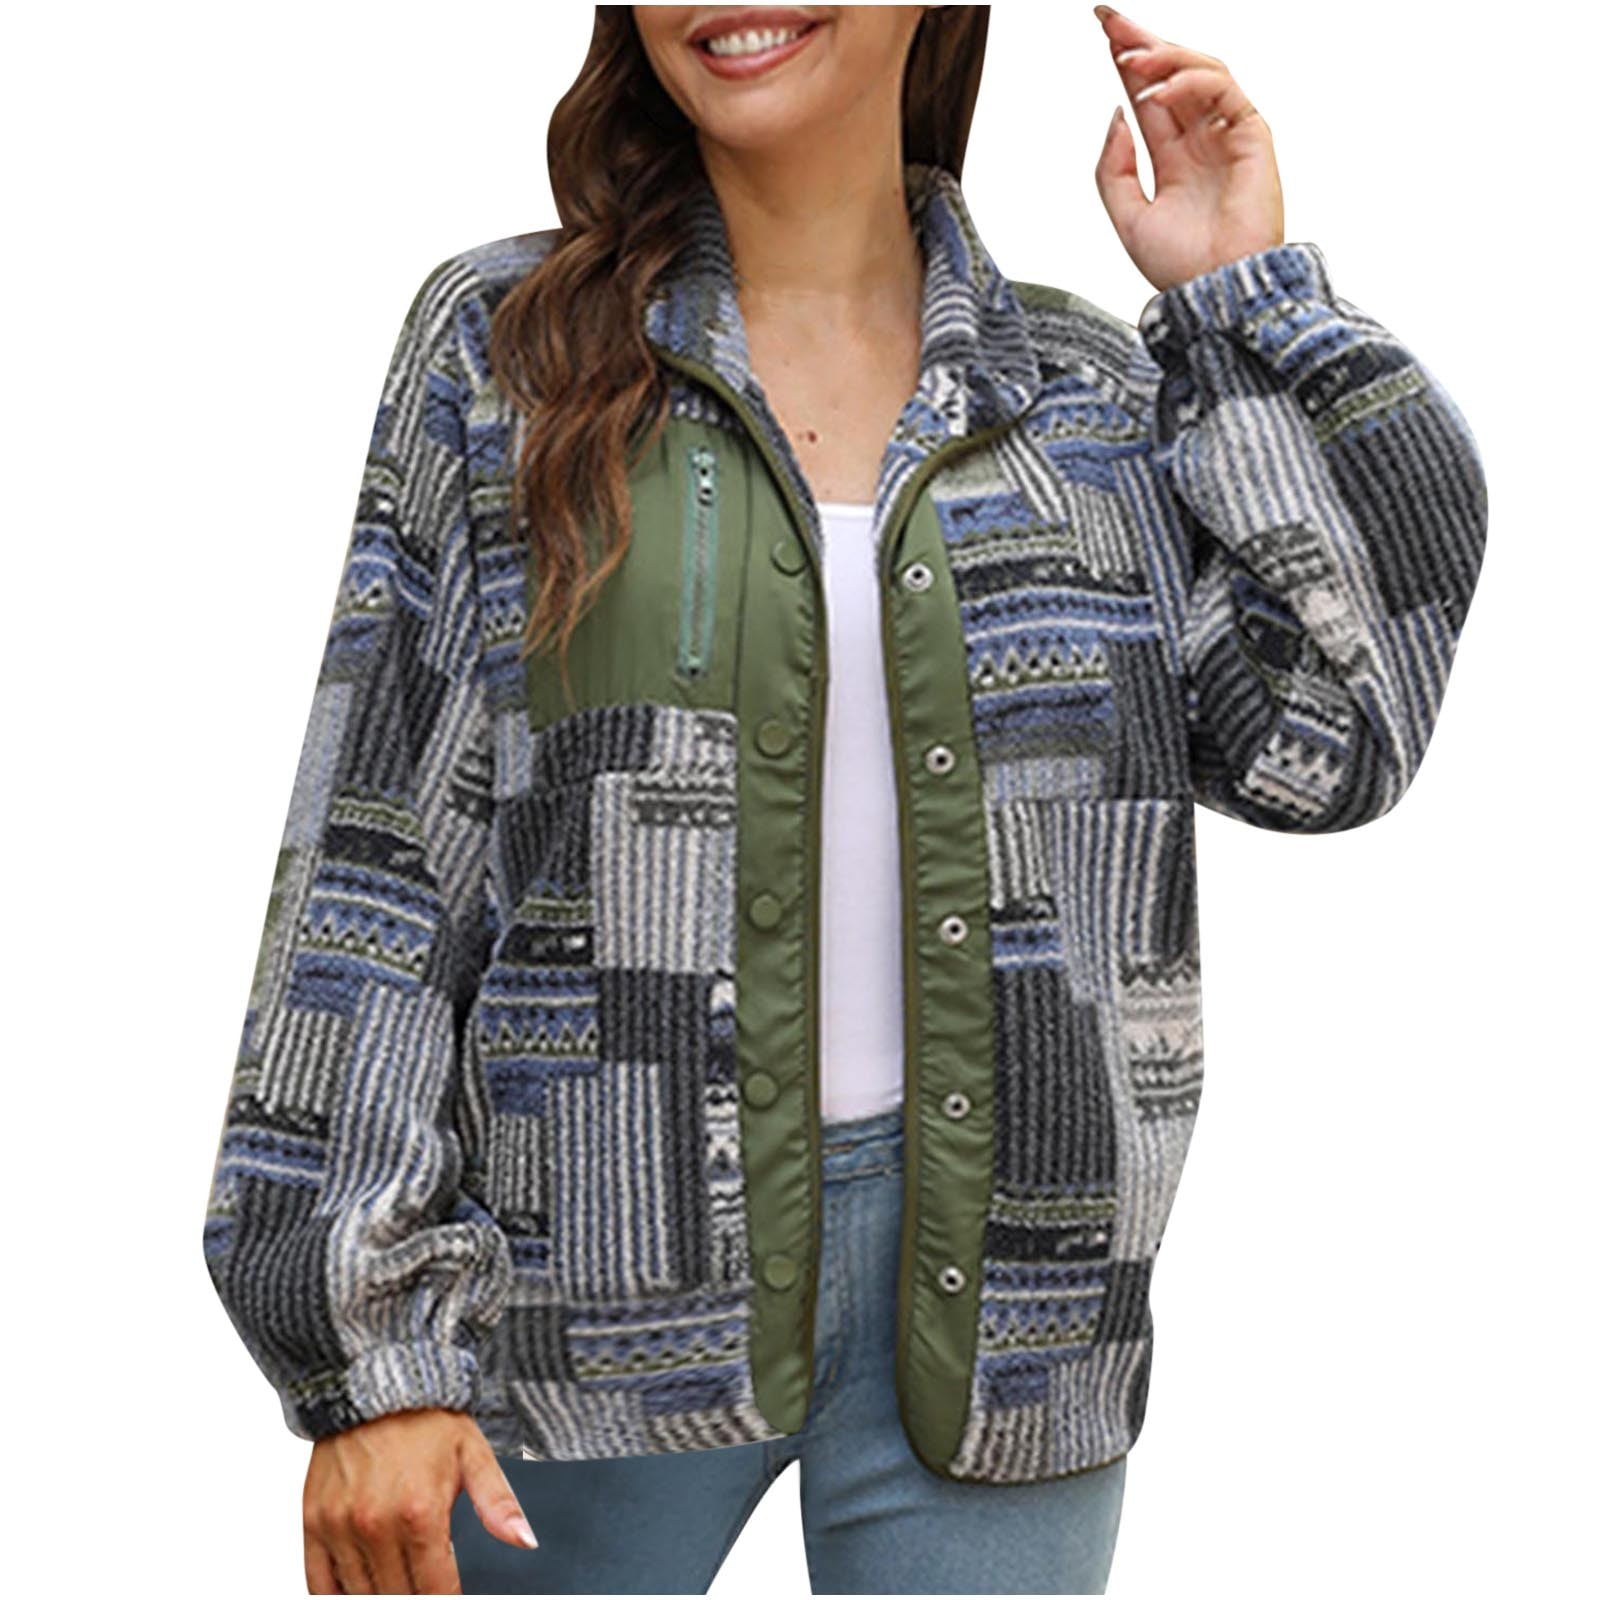 Winter Print Quilted Jacket For Women Patchwork Cotton Loose Lapel